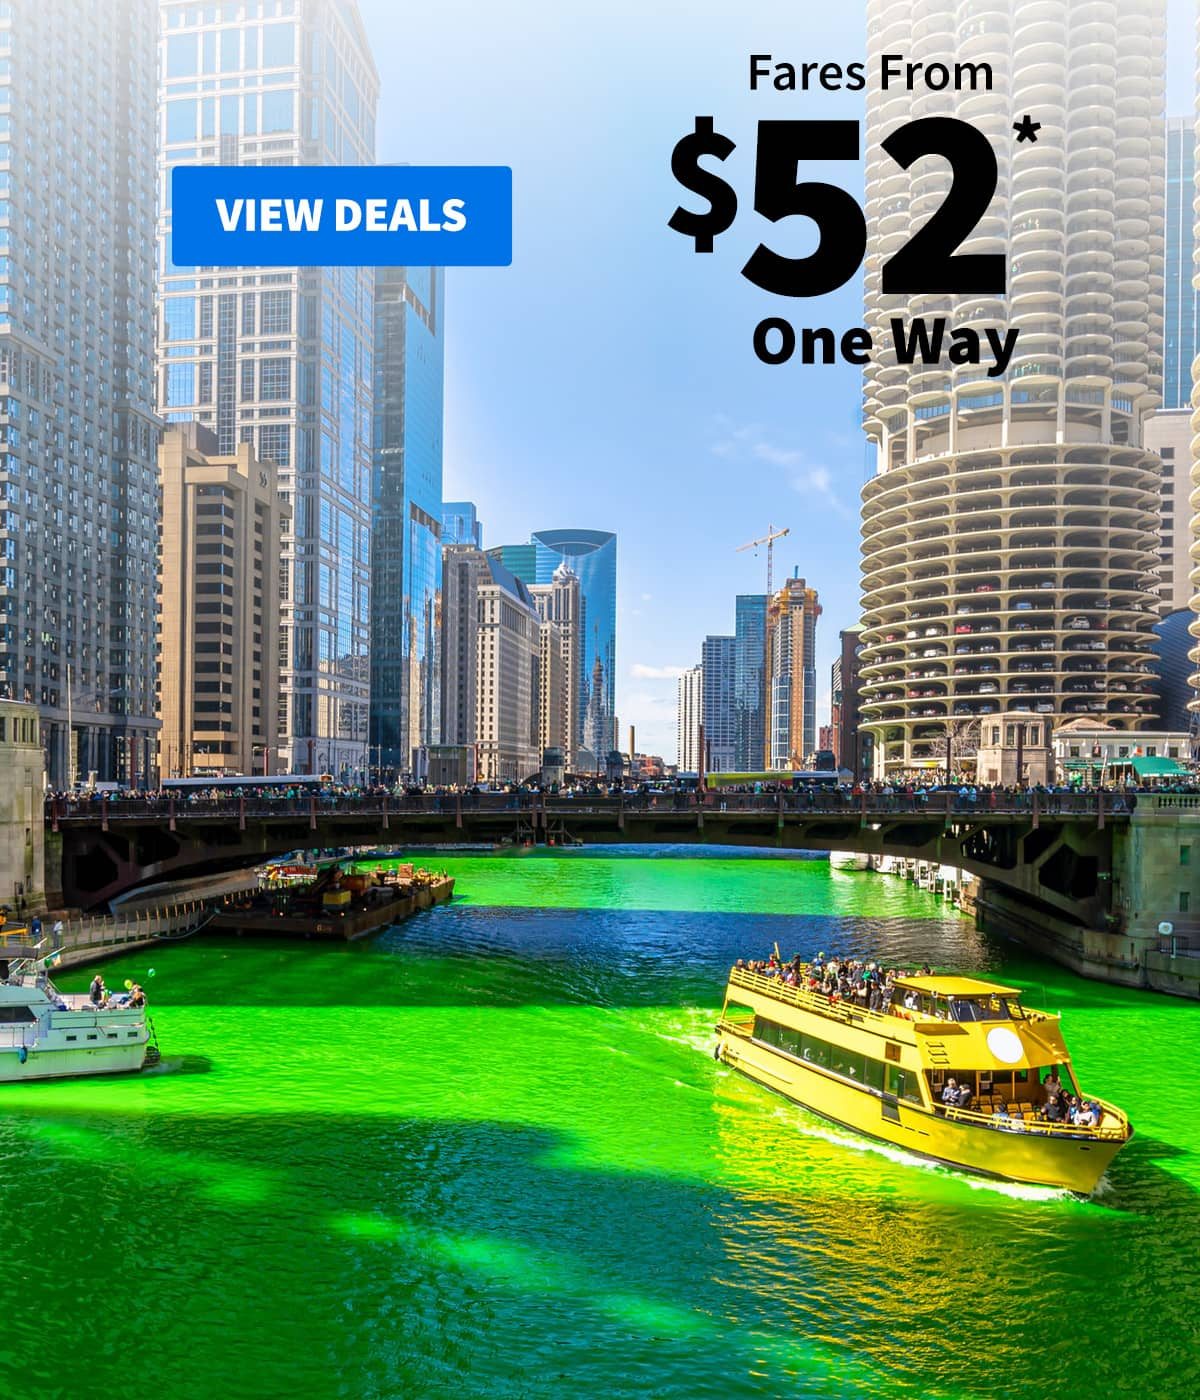 Fares From $52* One Way